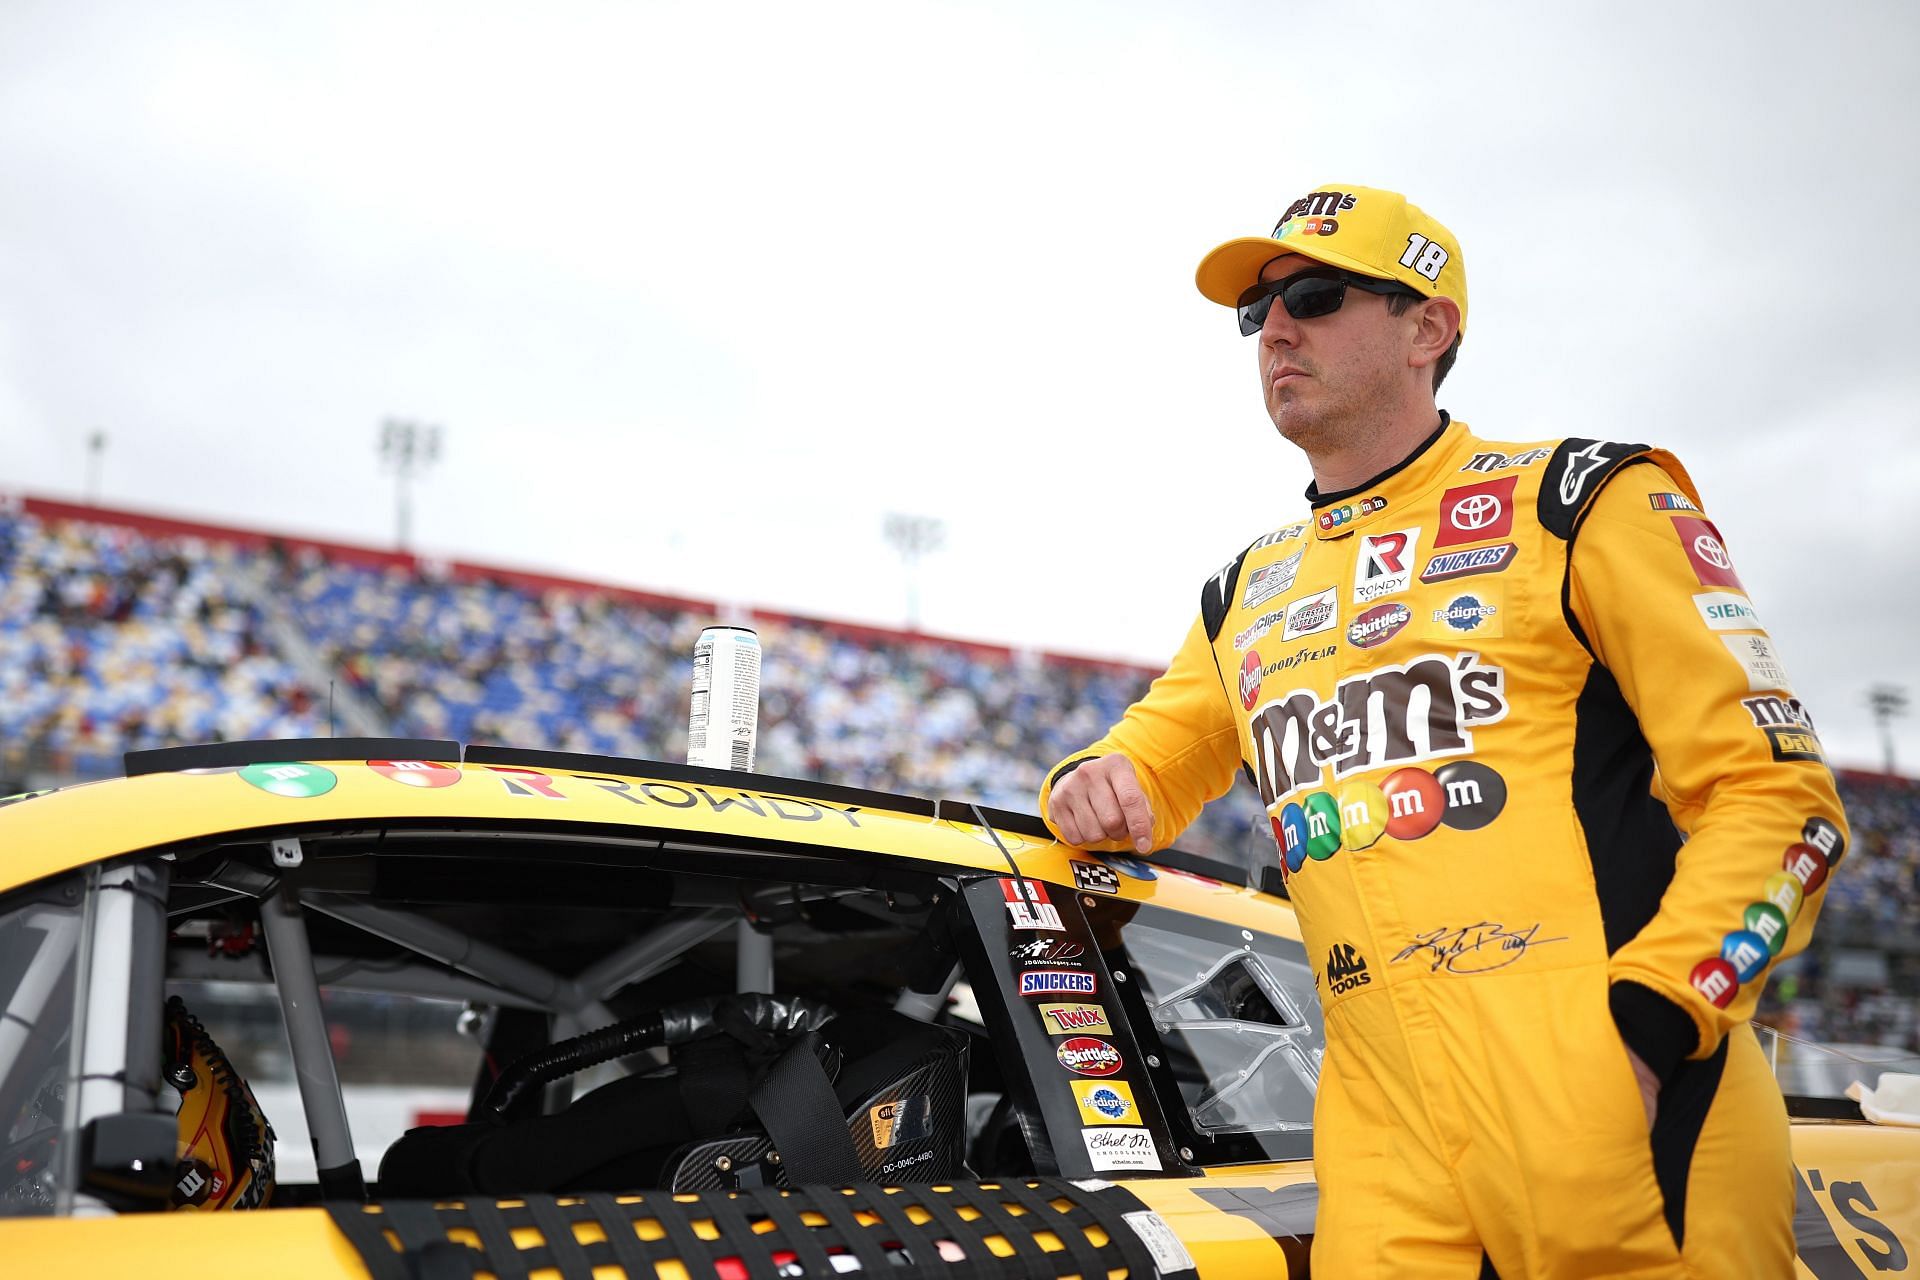 Kyle Busch waits on the grid prior to the NASCAR Cup Series Goodyear 400 at Darlington Raceway